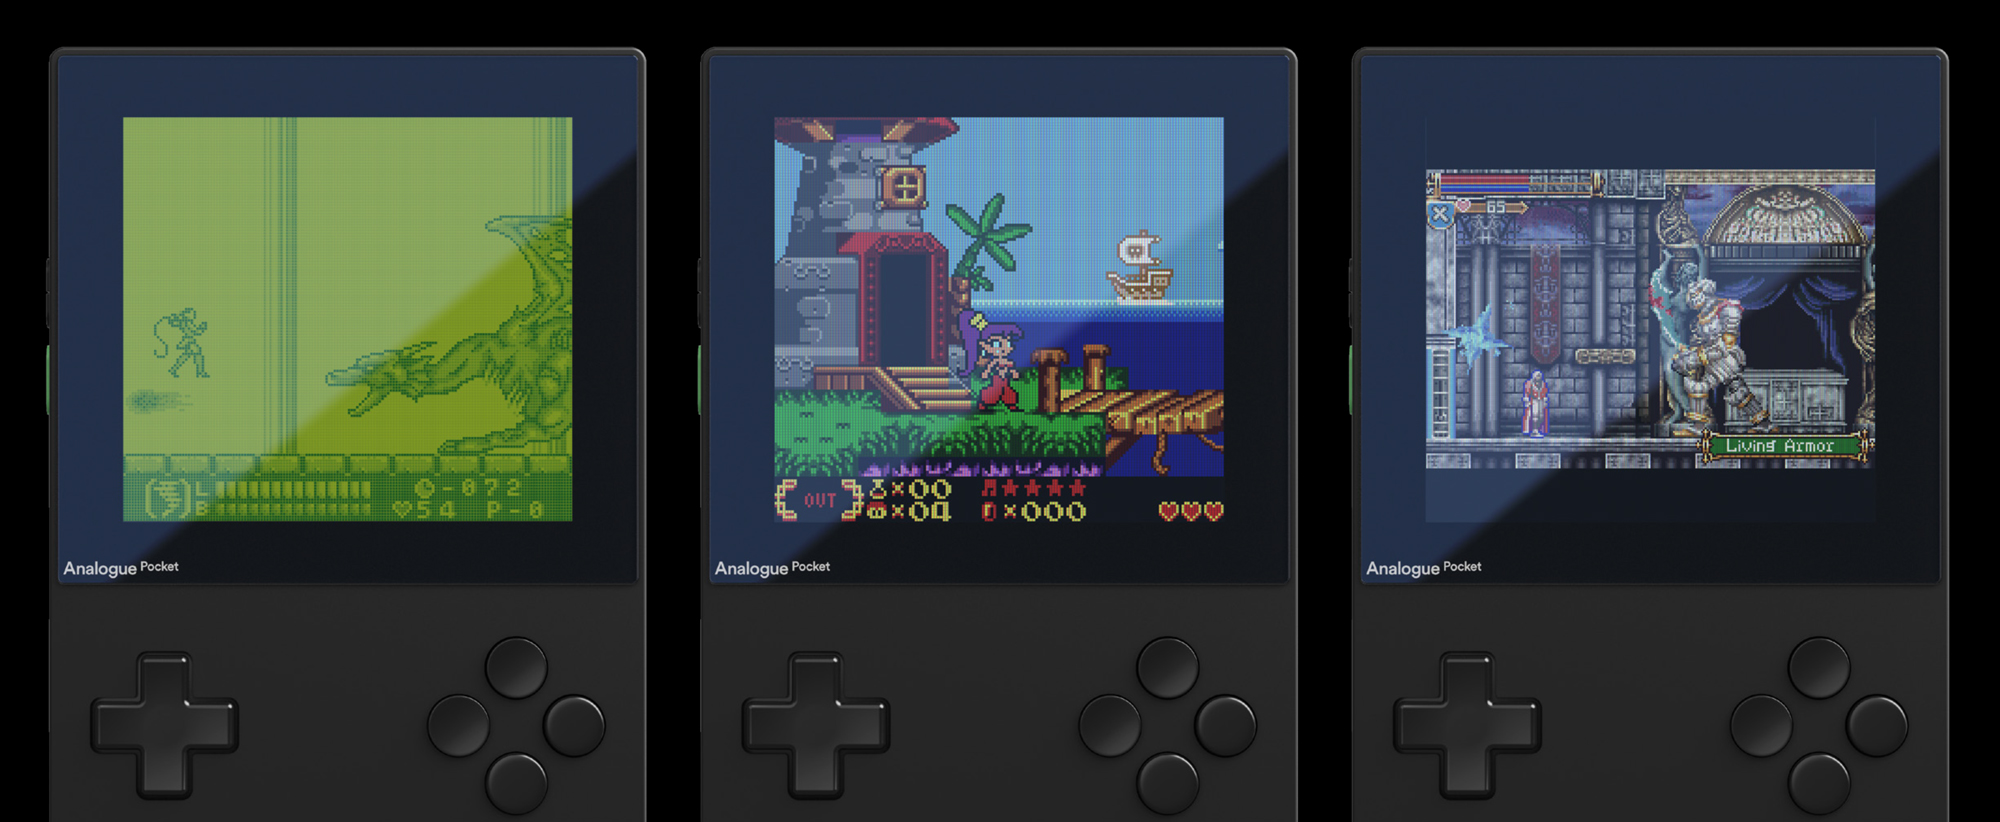 A new Original Display Modes feature will make classic Nintendo handheld games look as authentic as they play. (Photo: Analogue)